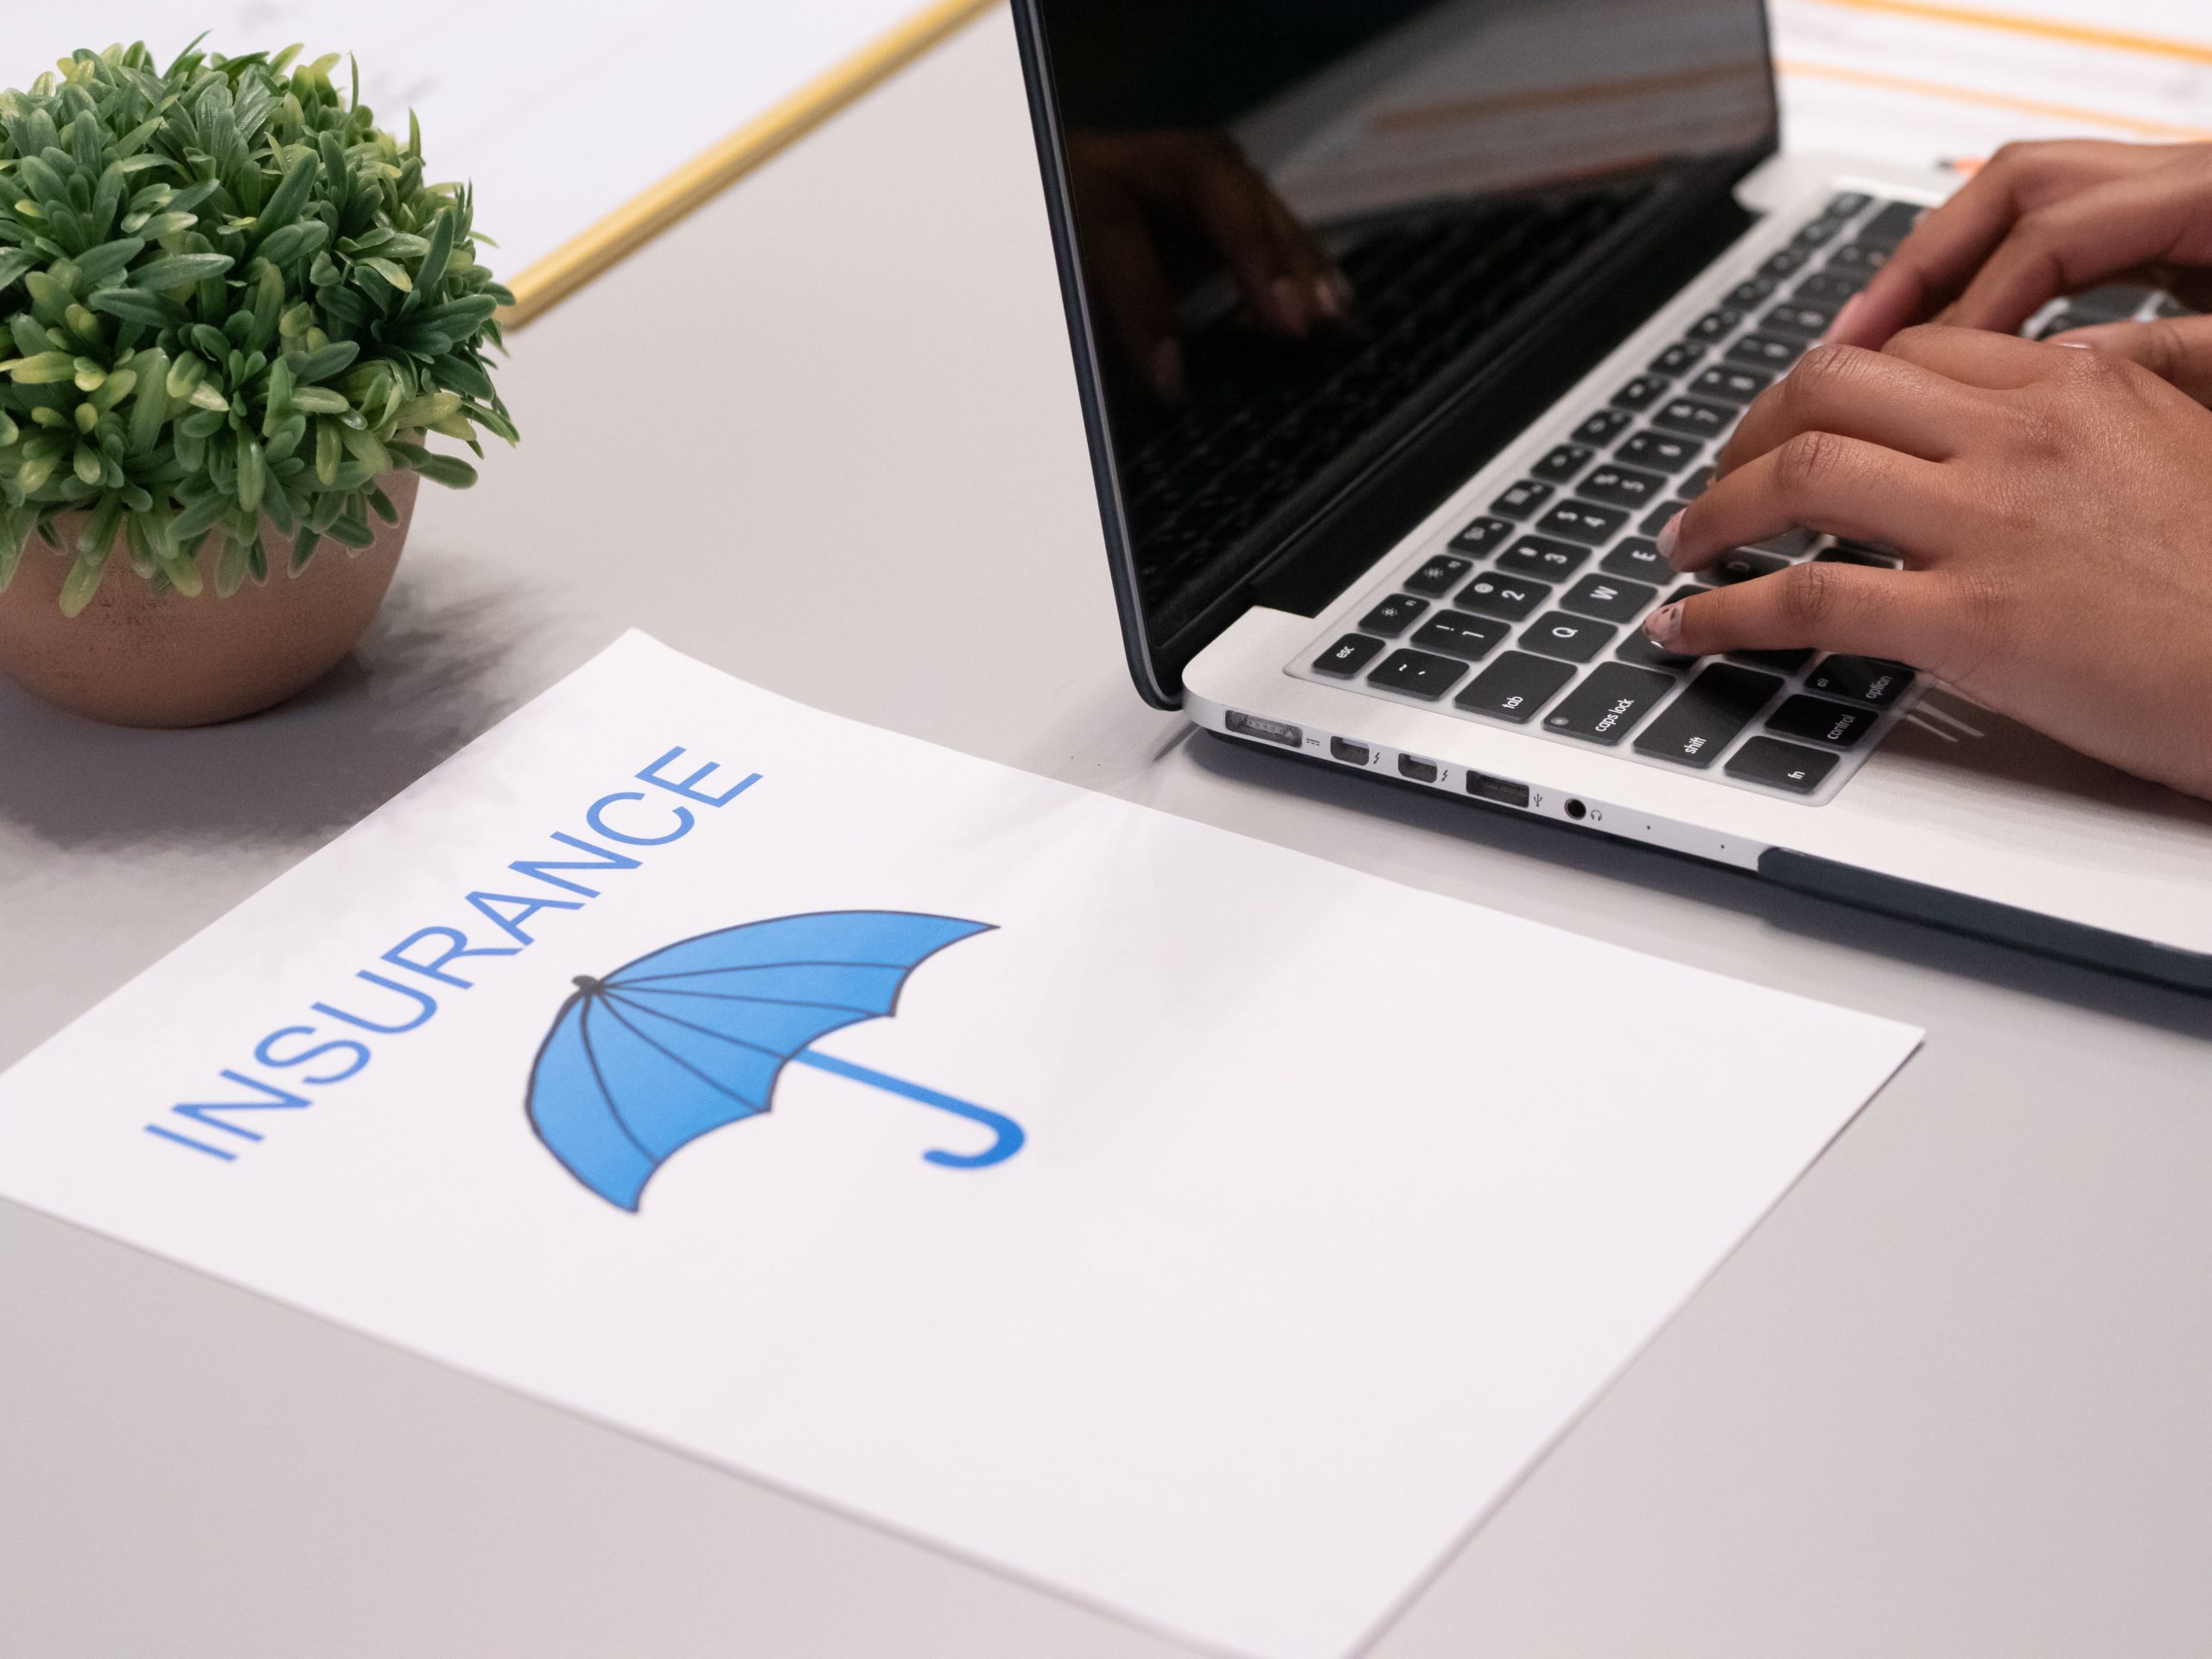 Insurance written on a paper placed beside a person typing on a laptop